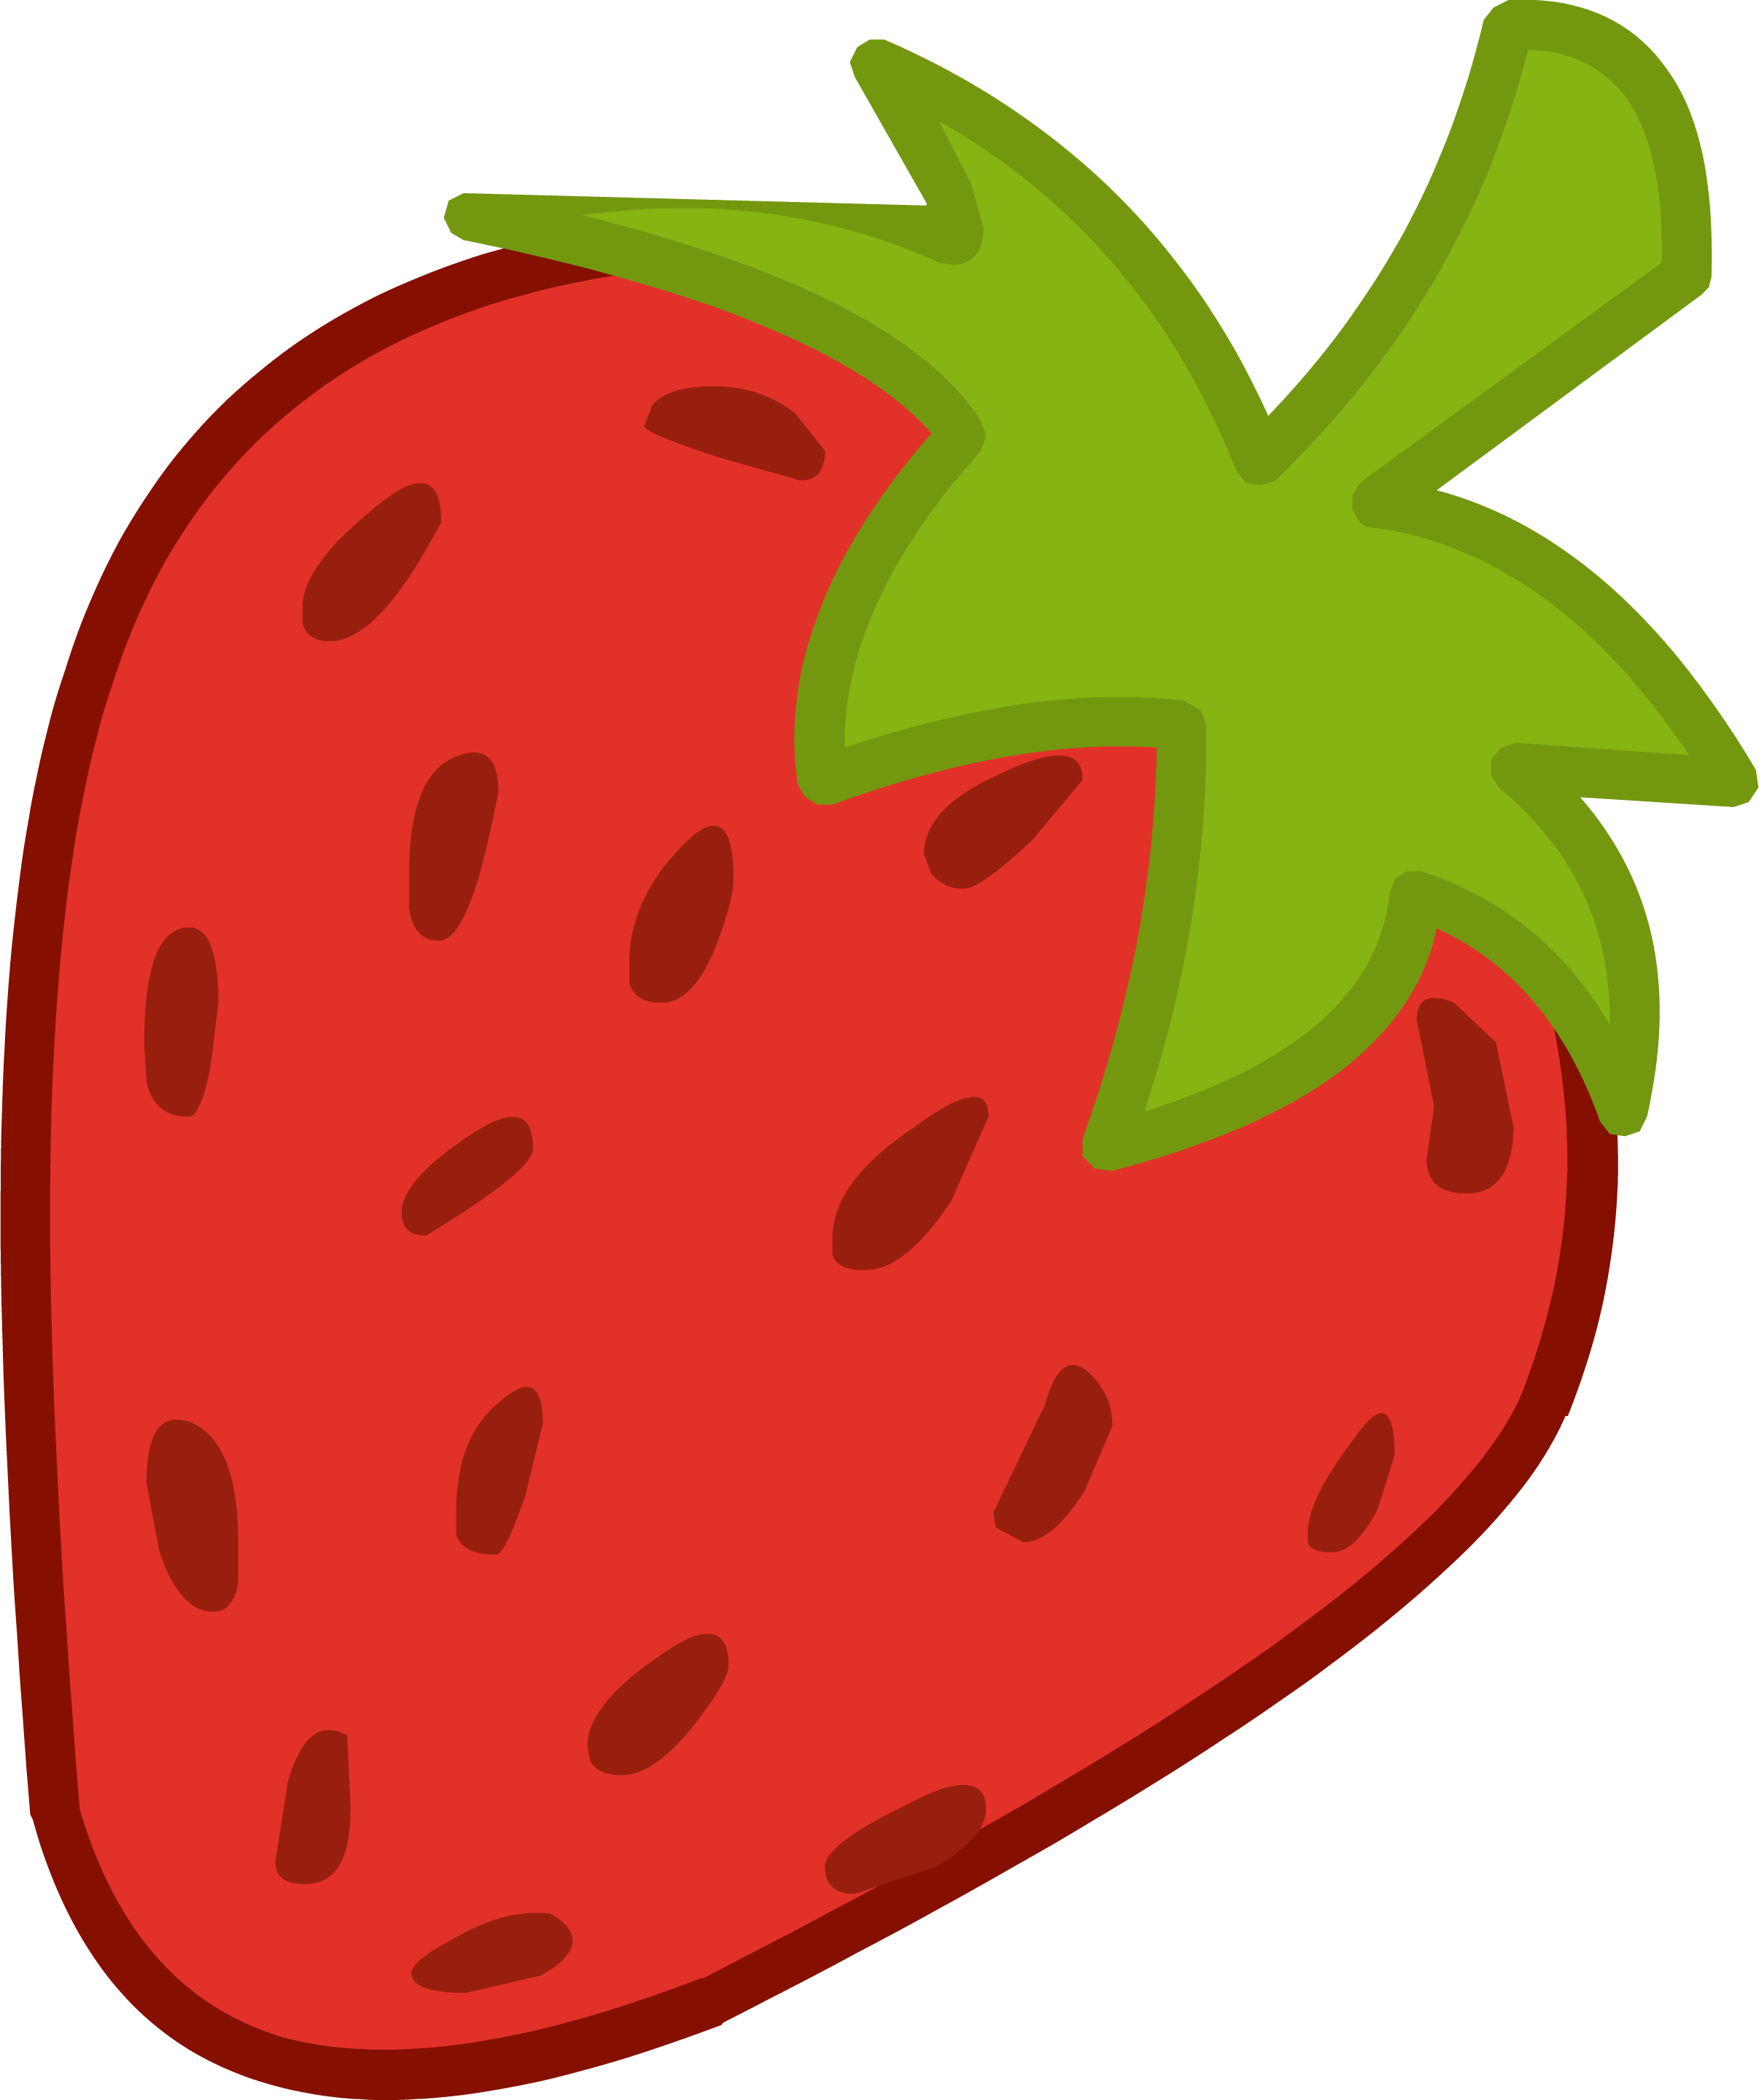 Strawberry shortcake clipart free clip art images image #6138